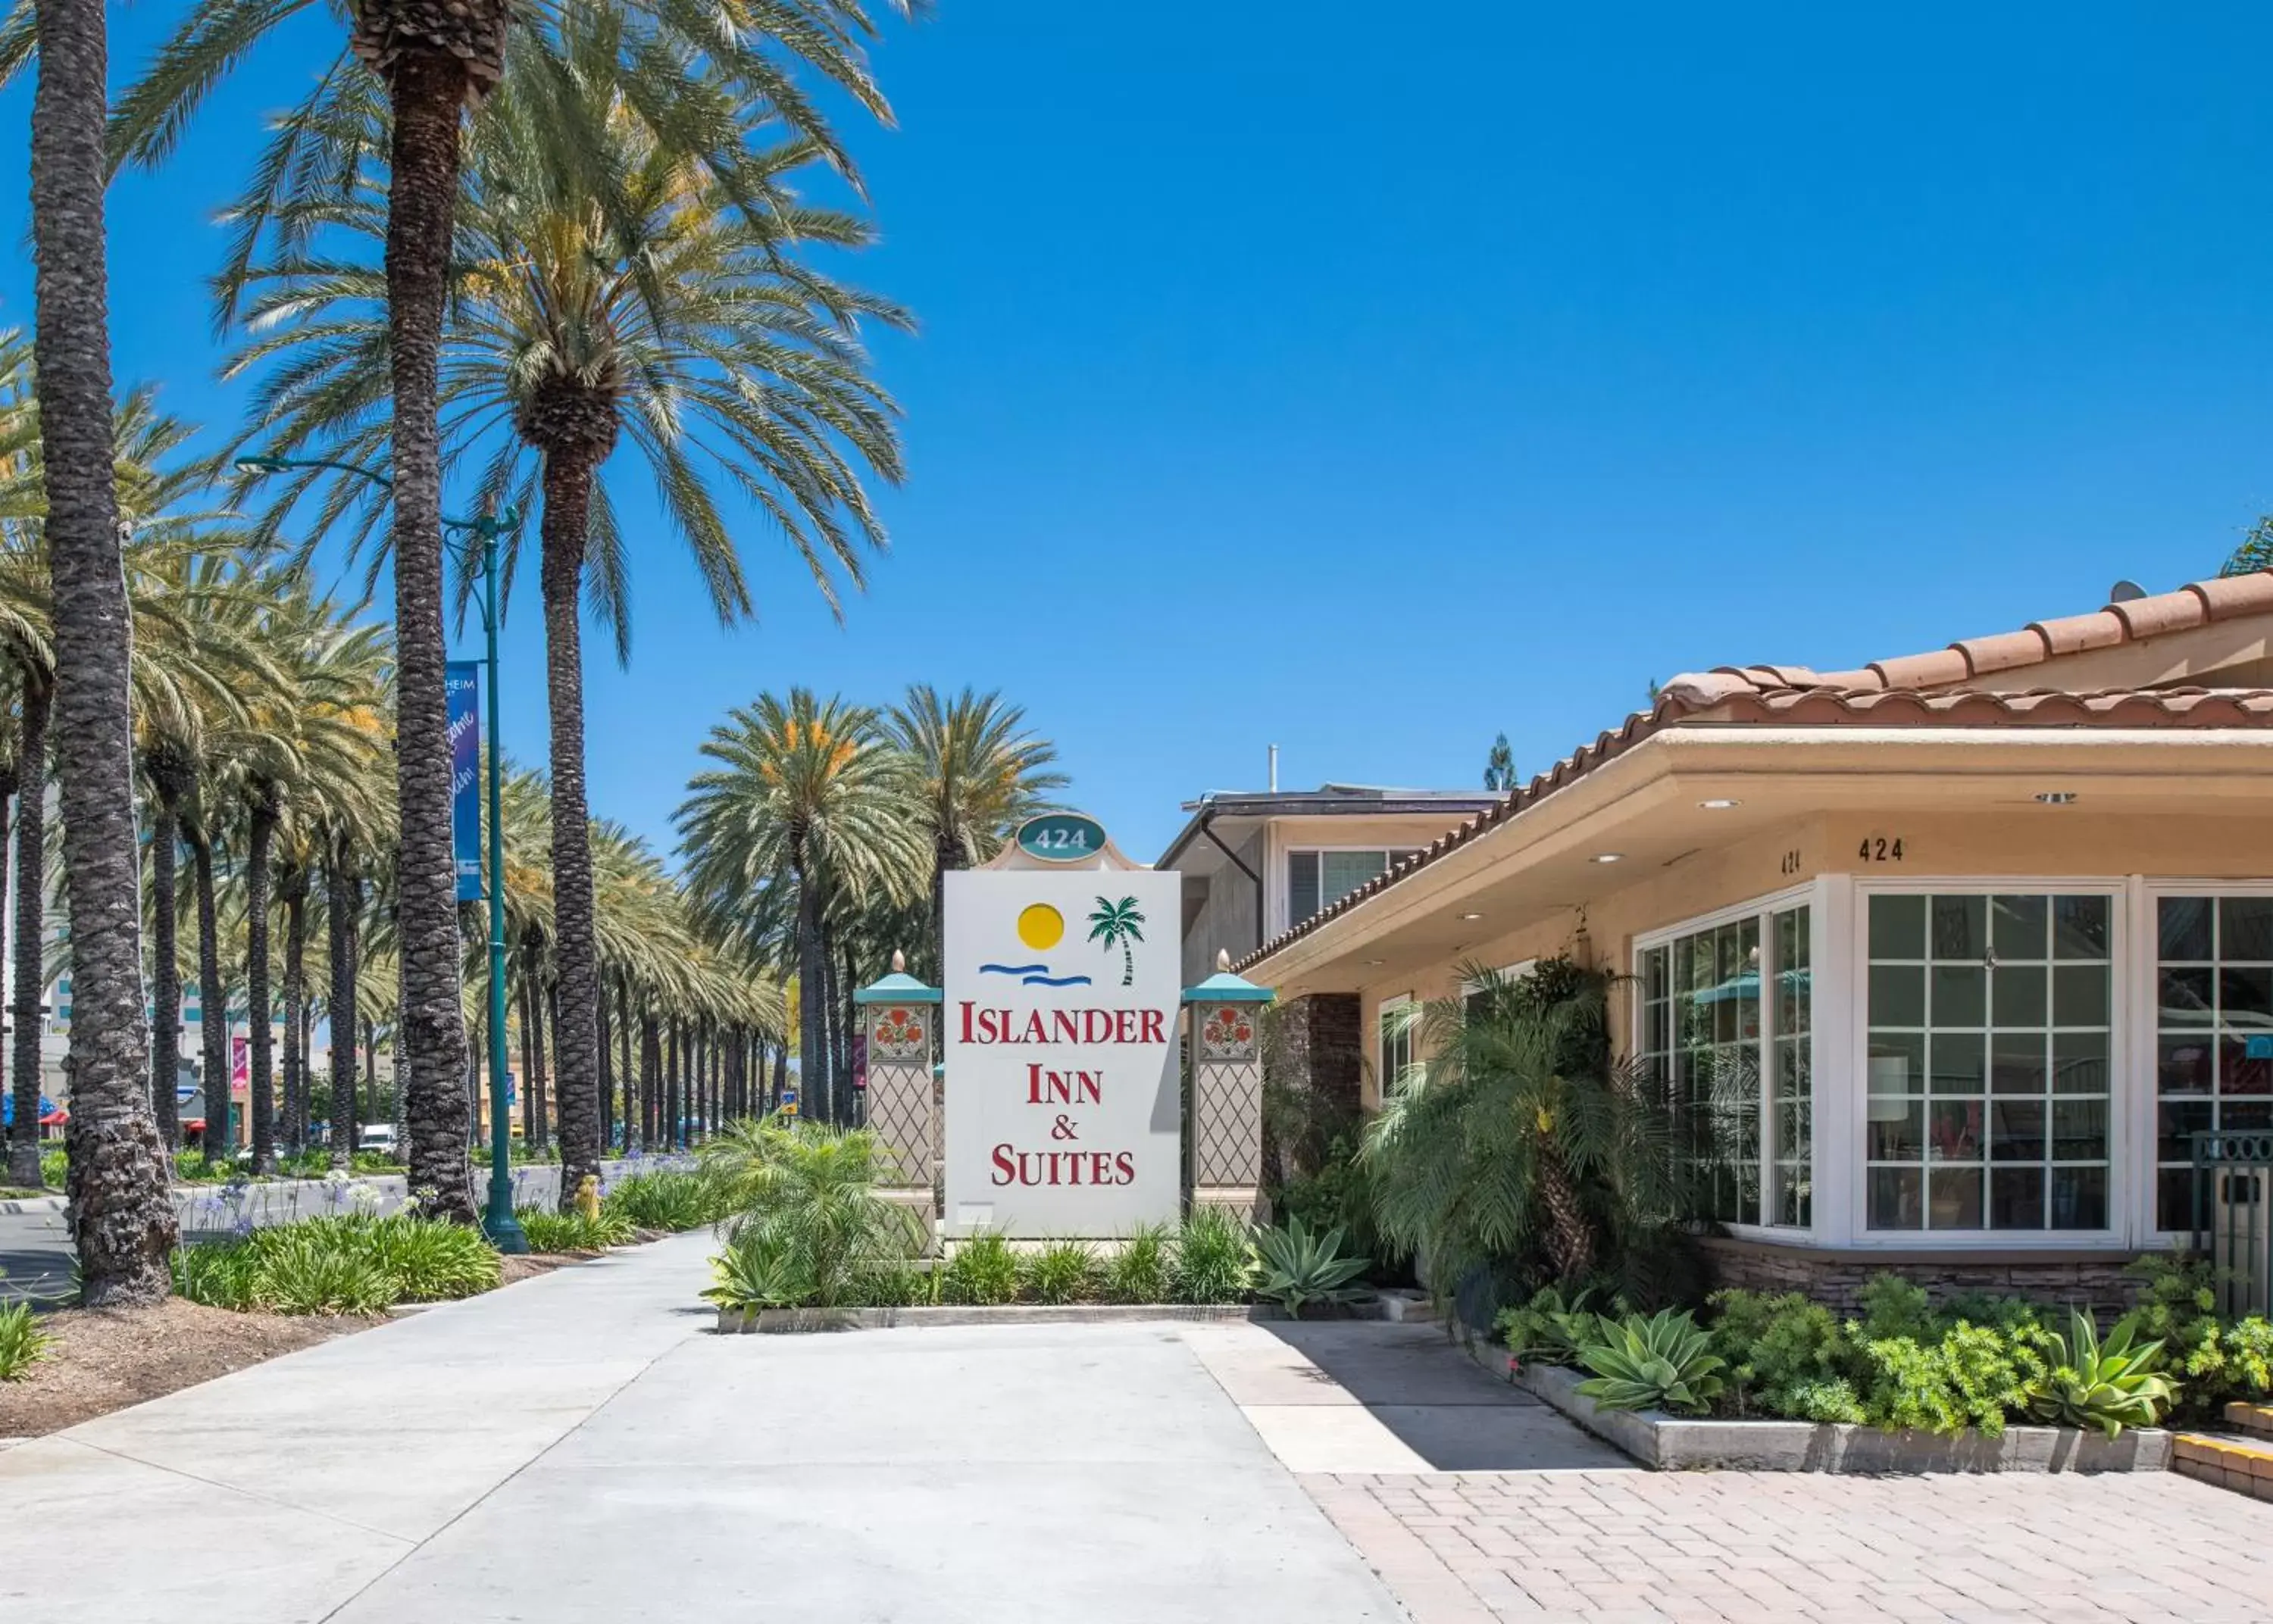 Property Building in Anaheim Islander Inn and Suites